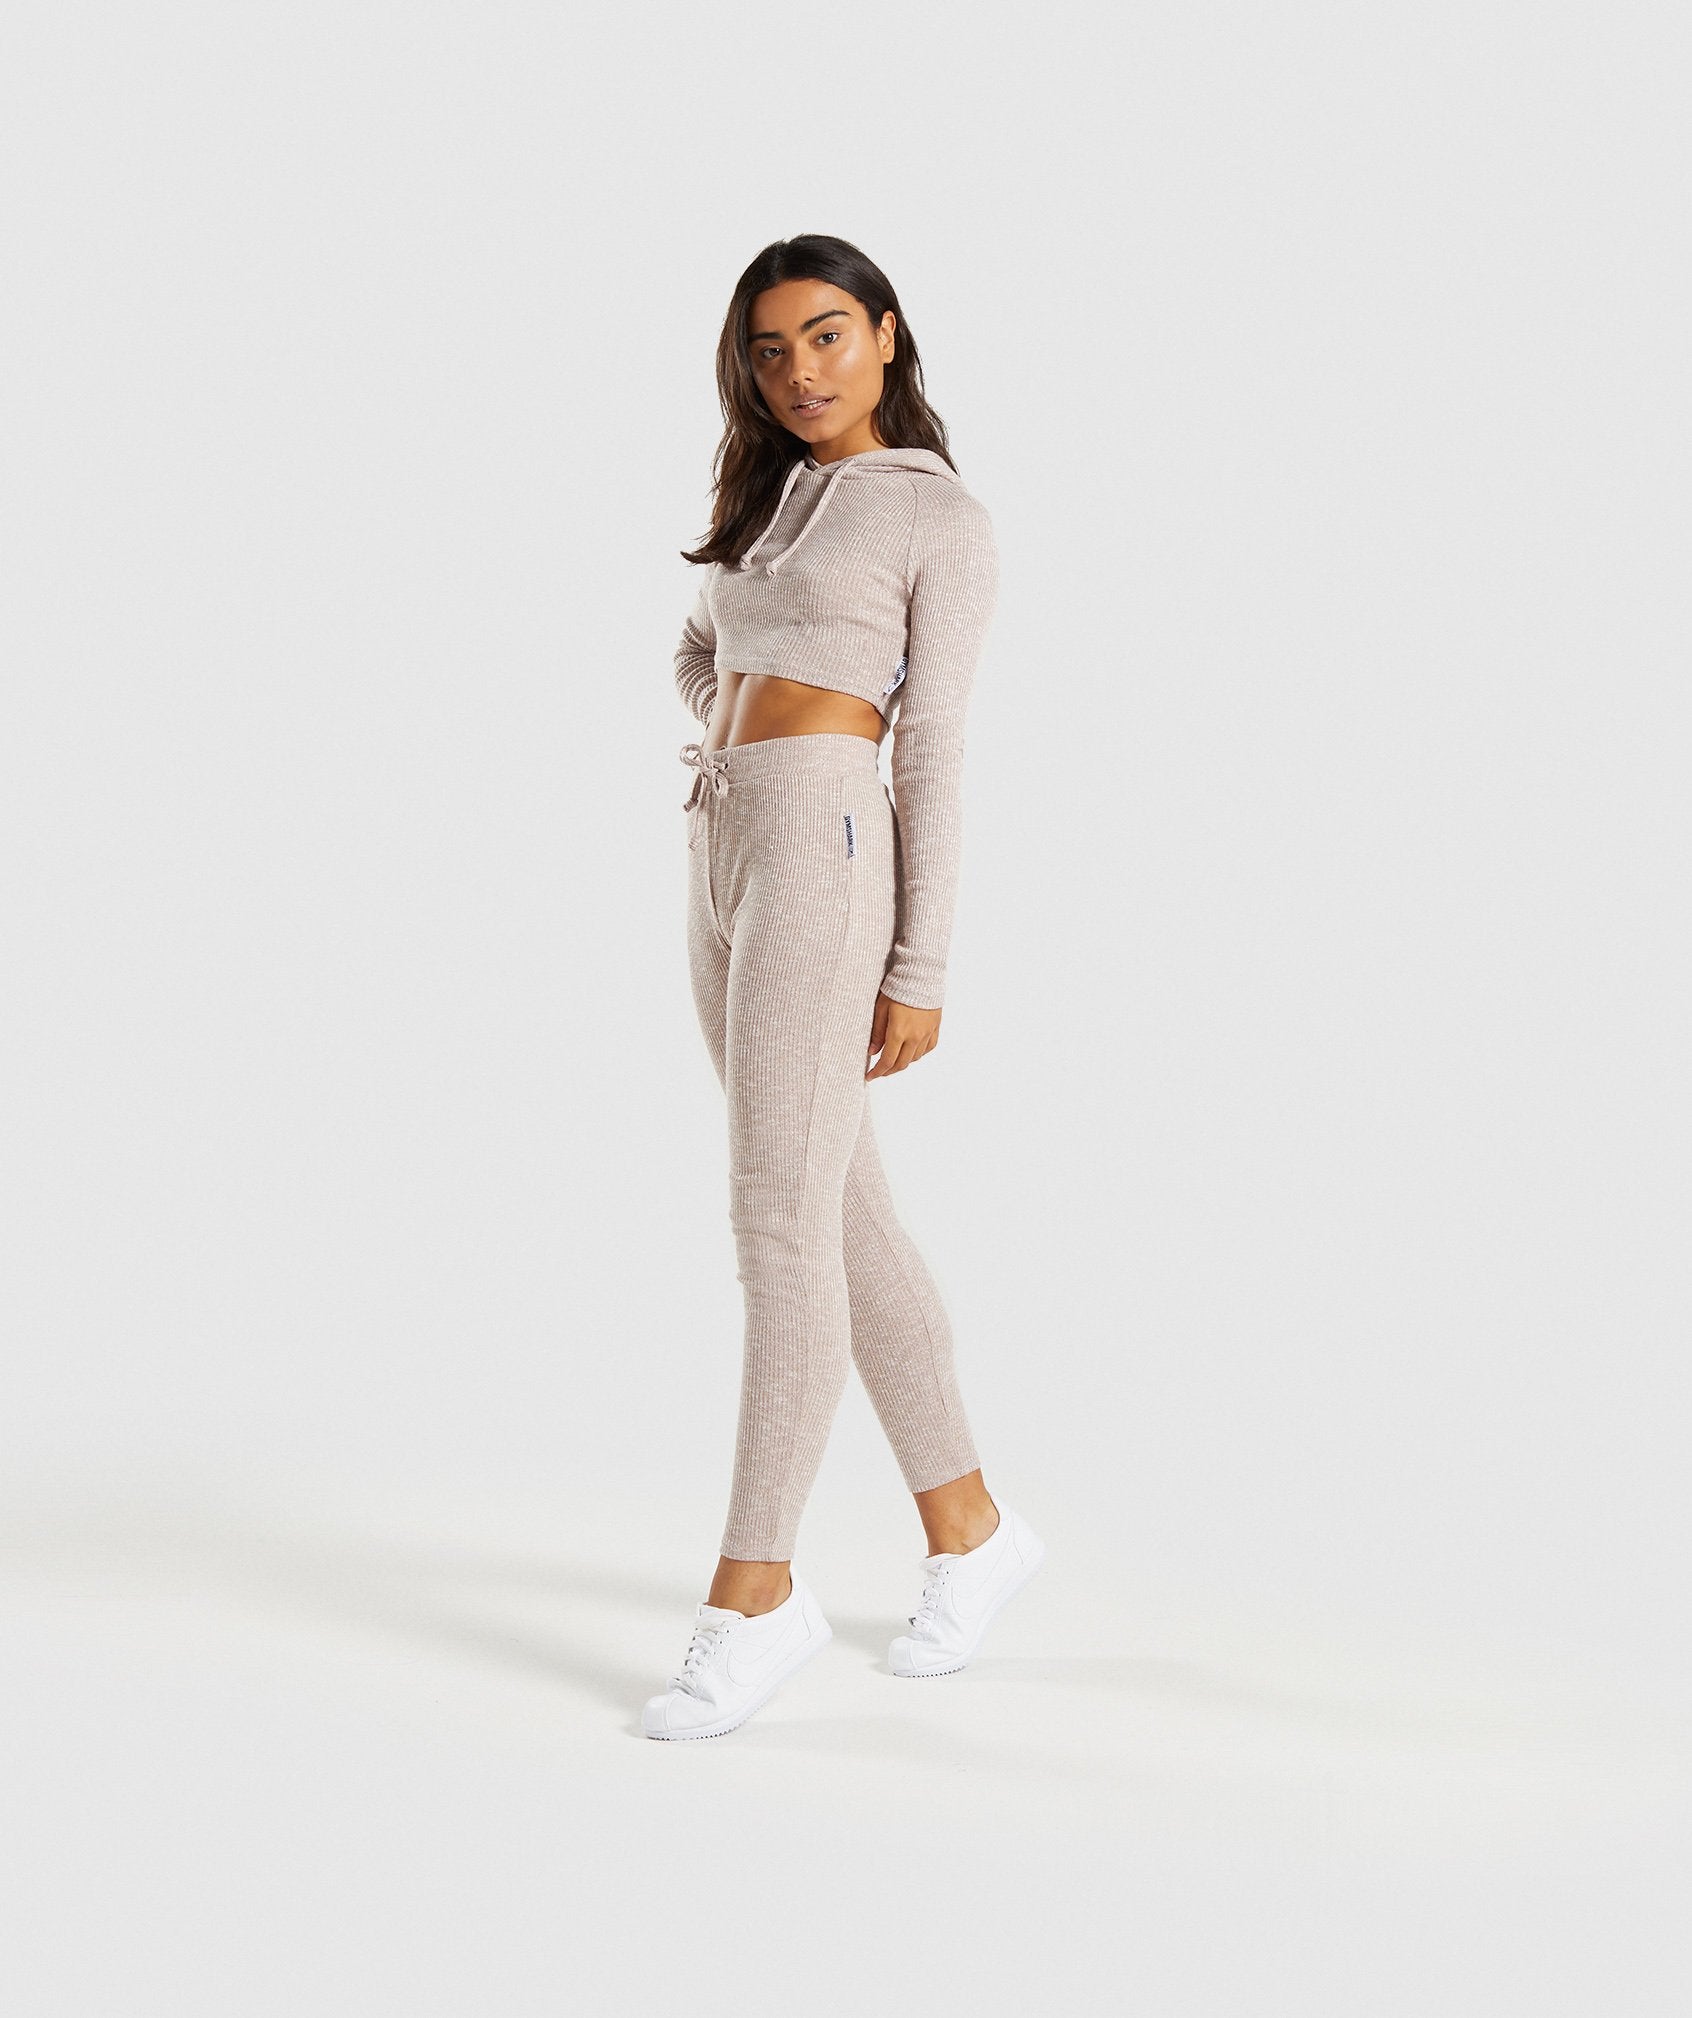 Slounge Cropped Hoodie in Taupe Marl - view 4